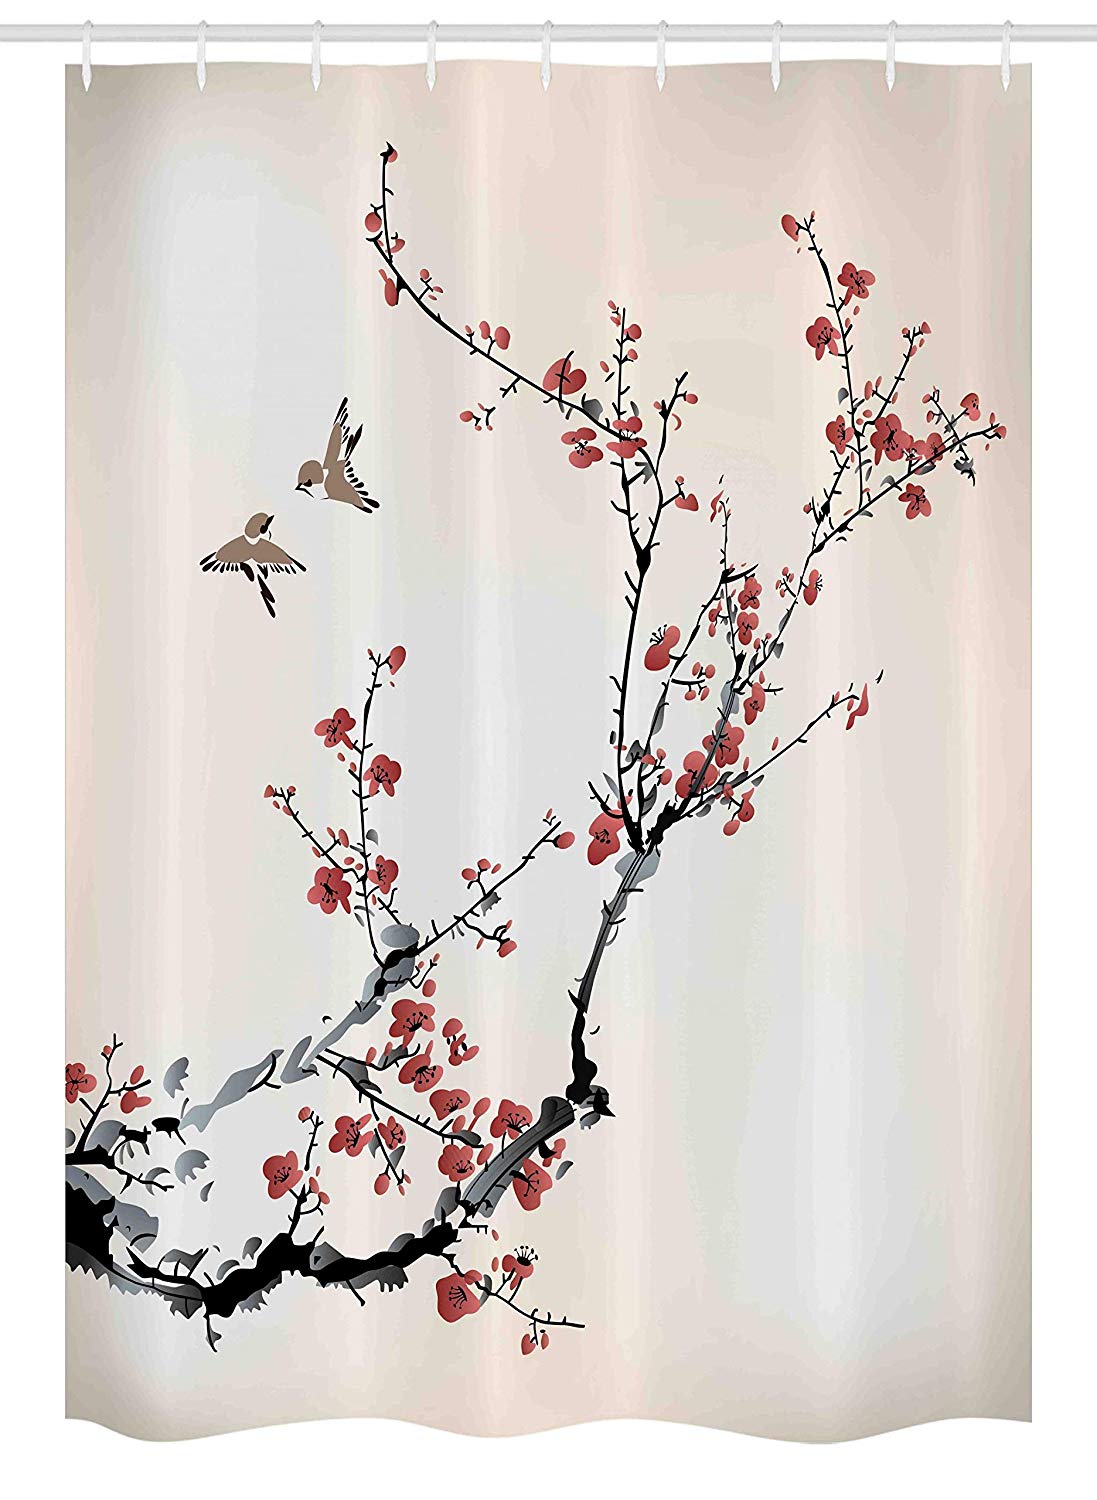 Ambesonne Nature Stall Shower Curtain, Cherry Branches Flowers Buds and Birds Style Artwork with Painting Effect, Fabric Bathroom Decor Set with Hooks, 54" X 78", Black Burgundy